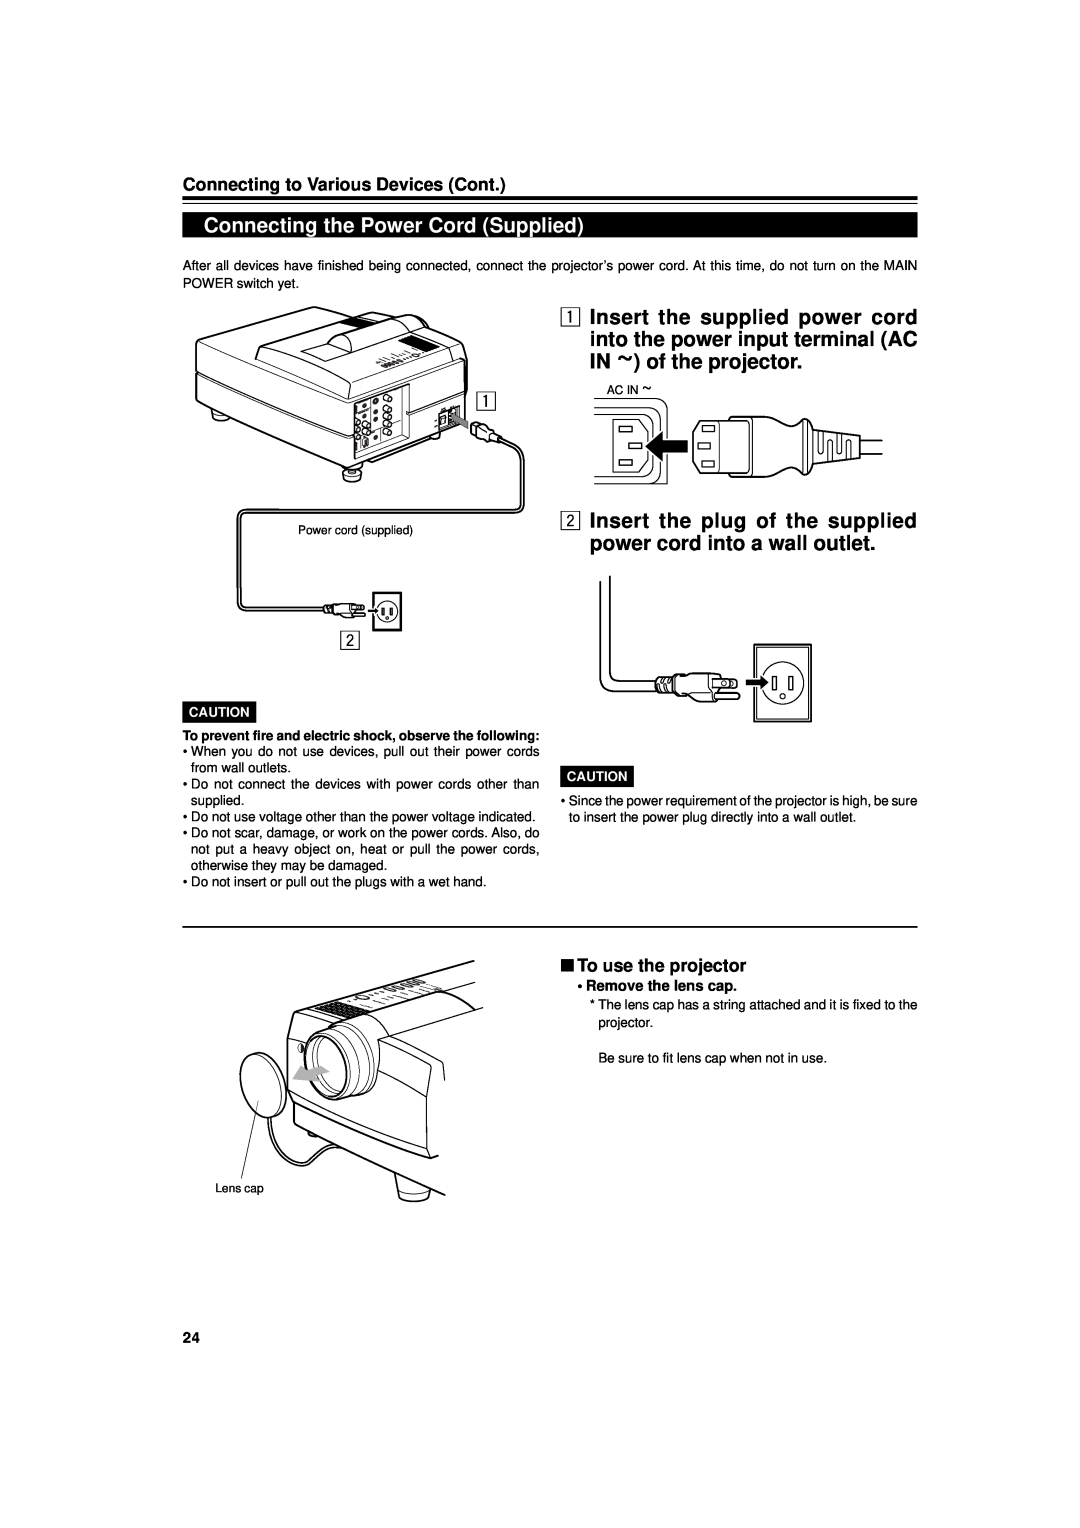 JVC DLA-G11U manual Connecting the Power Cord Supplied, Insert the supplied power cord, Connecting to Various Devices Cont 